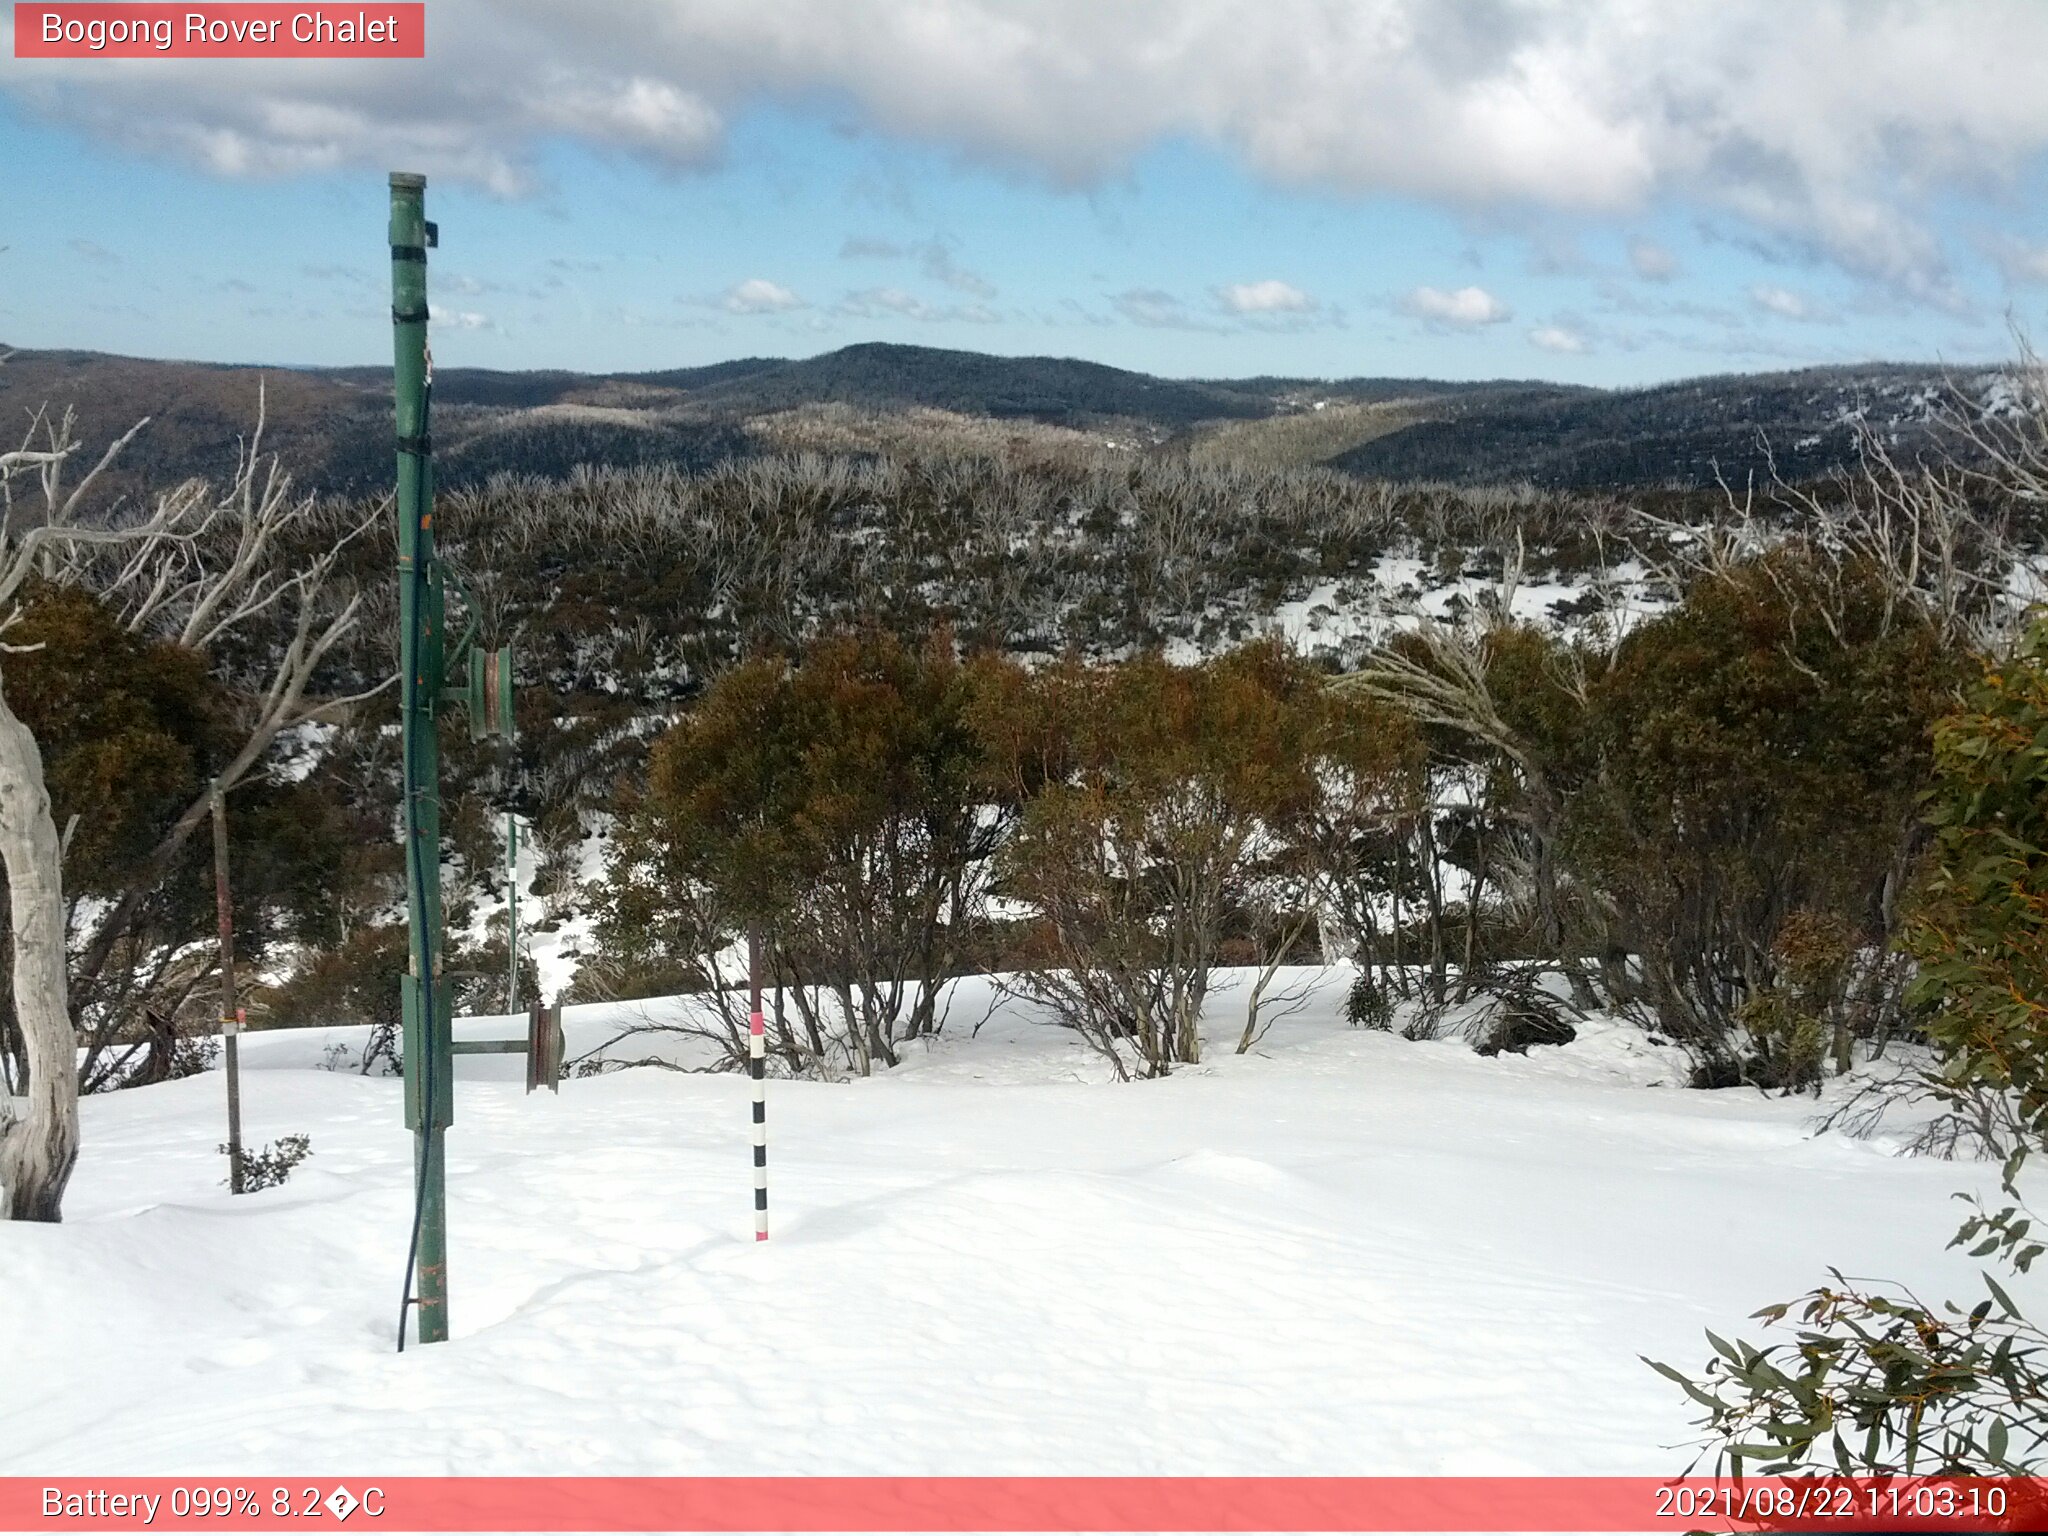 Bogong Web Cam 11:03am Sunday 22nd of August 2021